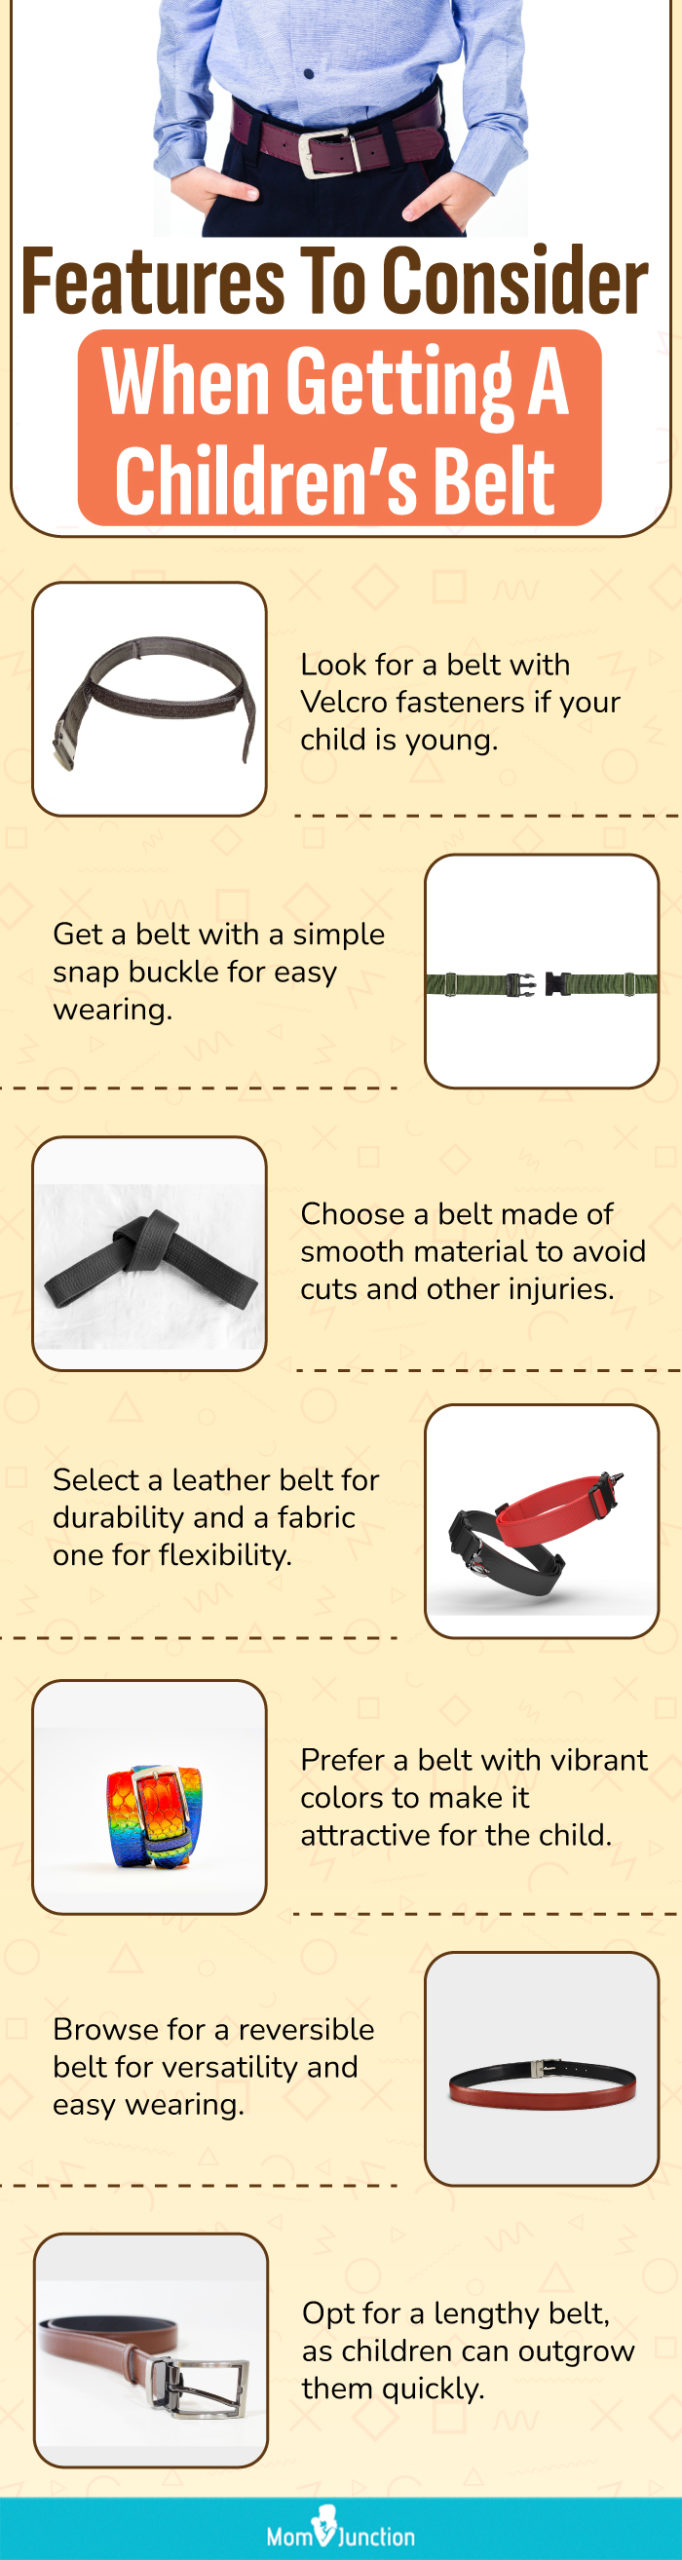 Features To Consider When Getting A Children’s Belt (infographic)